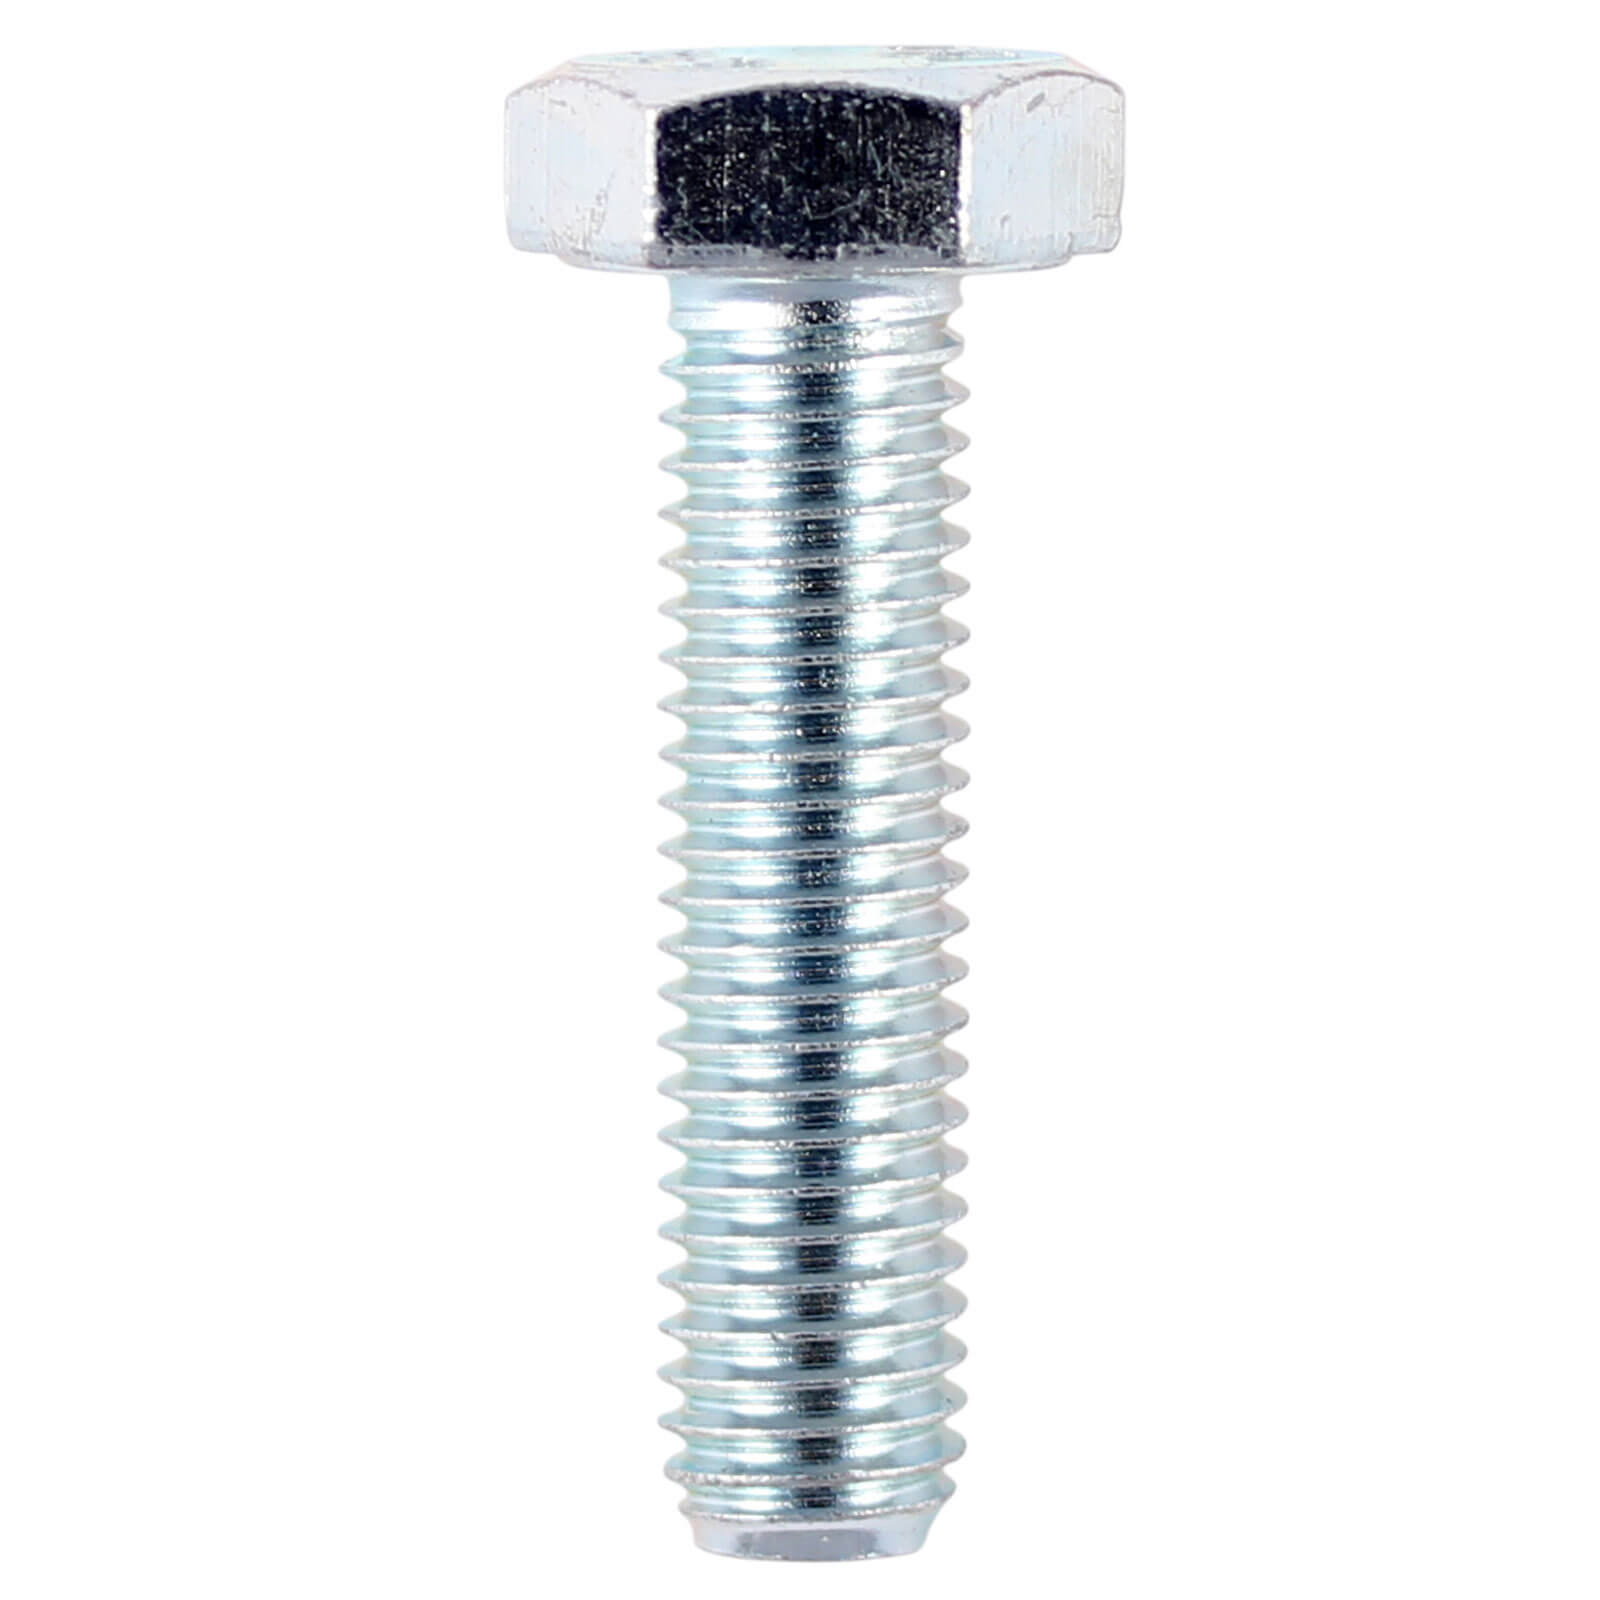 Image of Hexagon High Tensile Set Screw Zinc Plated M6 16mm Pack of 500